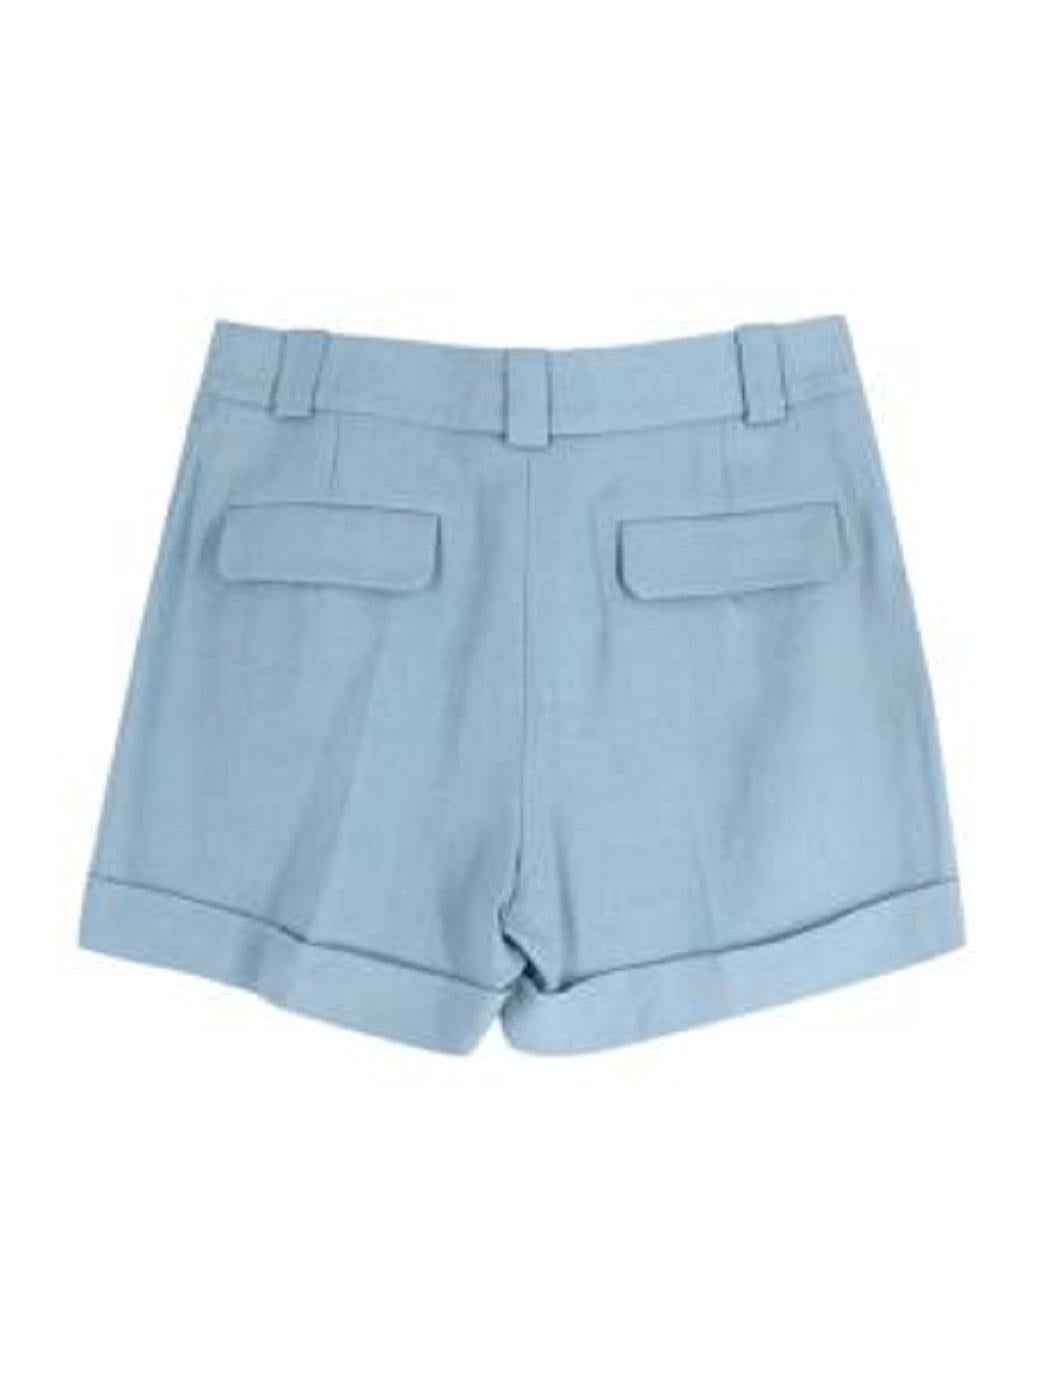 Chloe Chloé Powder Blue Tailored Shorts In Excellent Condition For Sale In London, GB